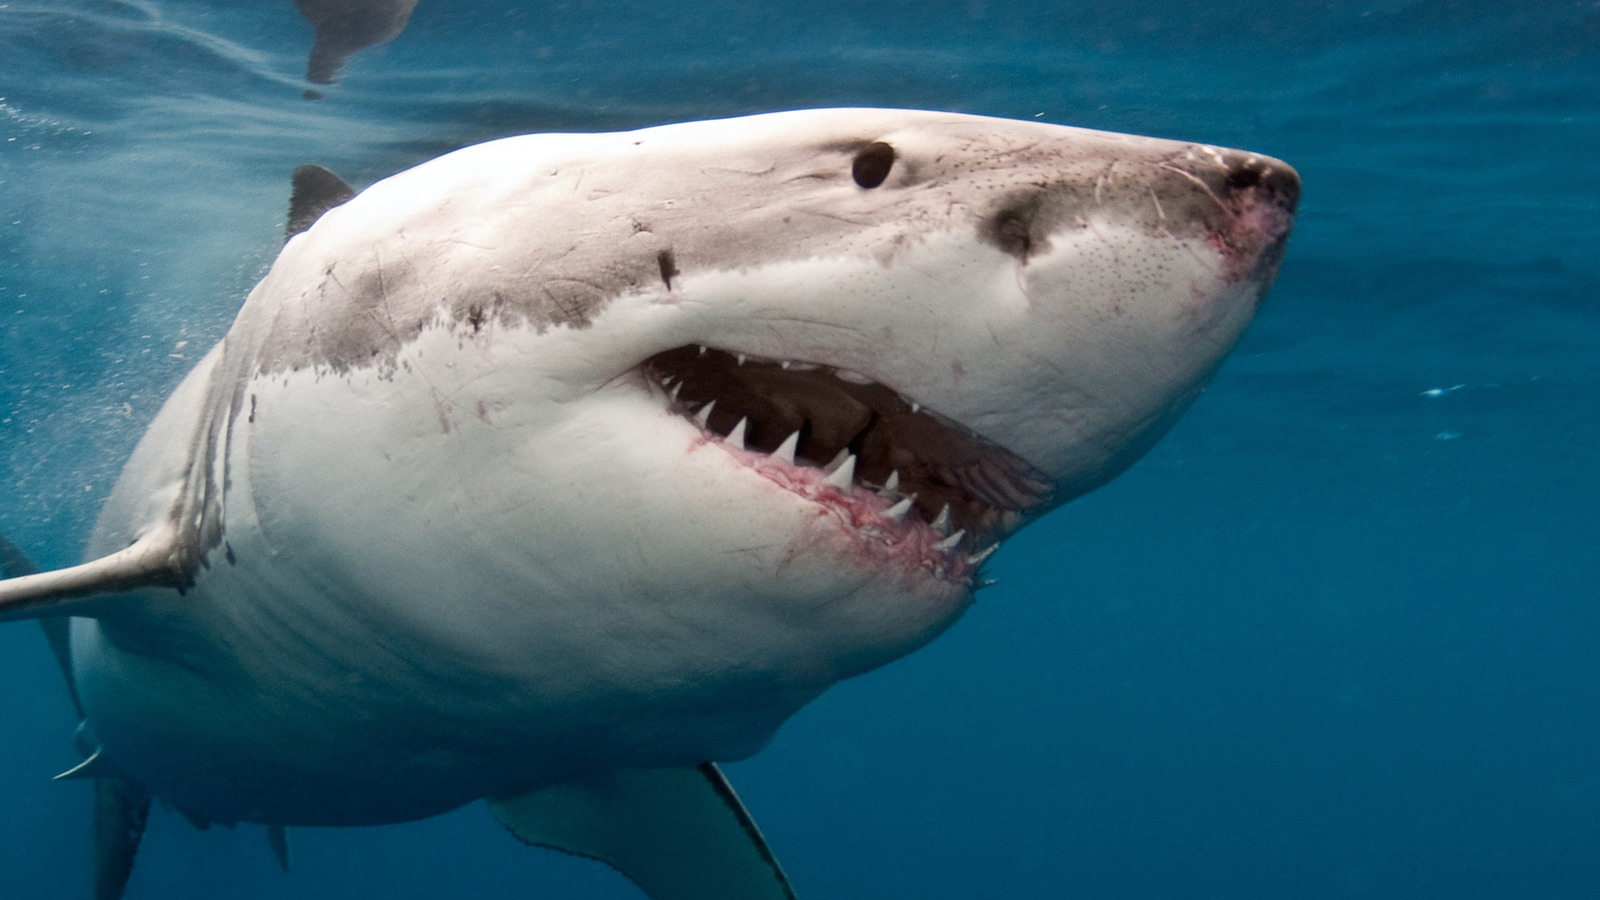 Great White Shark Myths - 5 Common Misconceptions About Great Whites